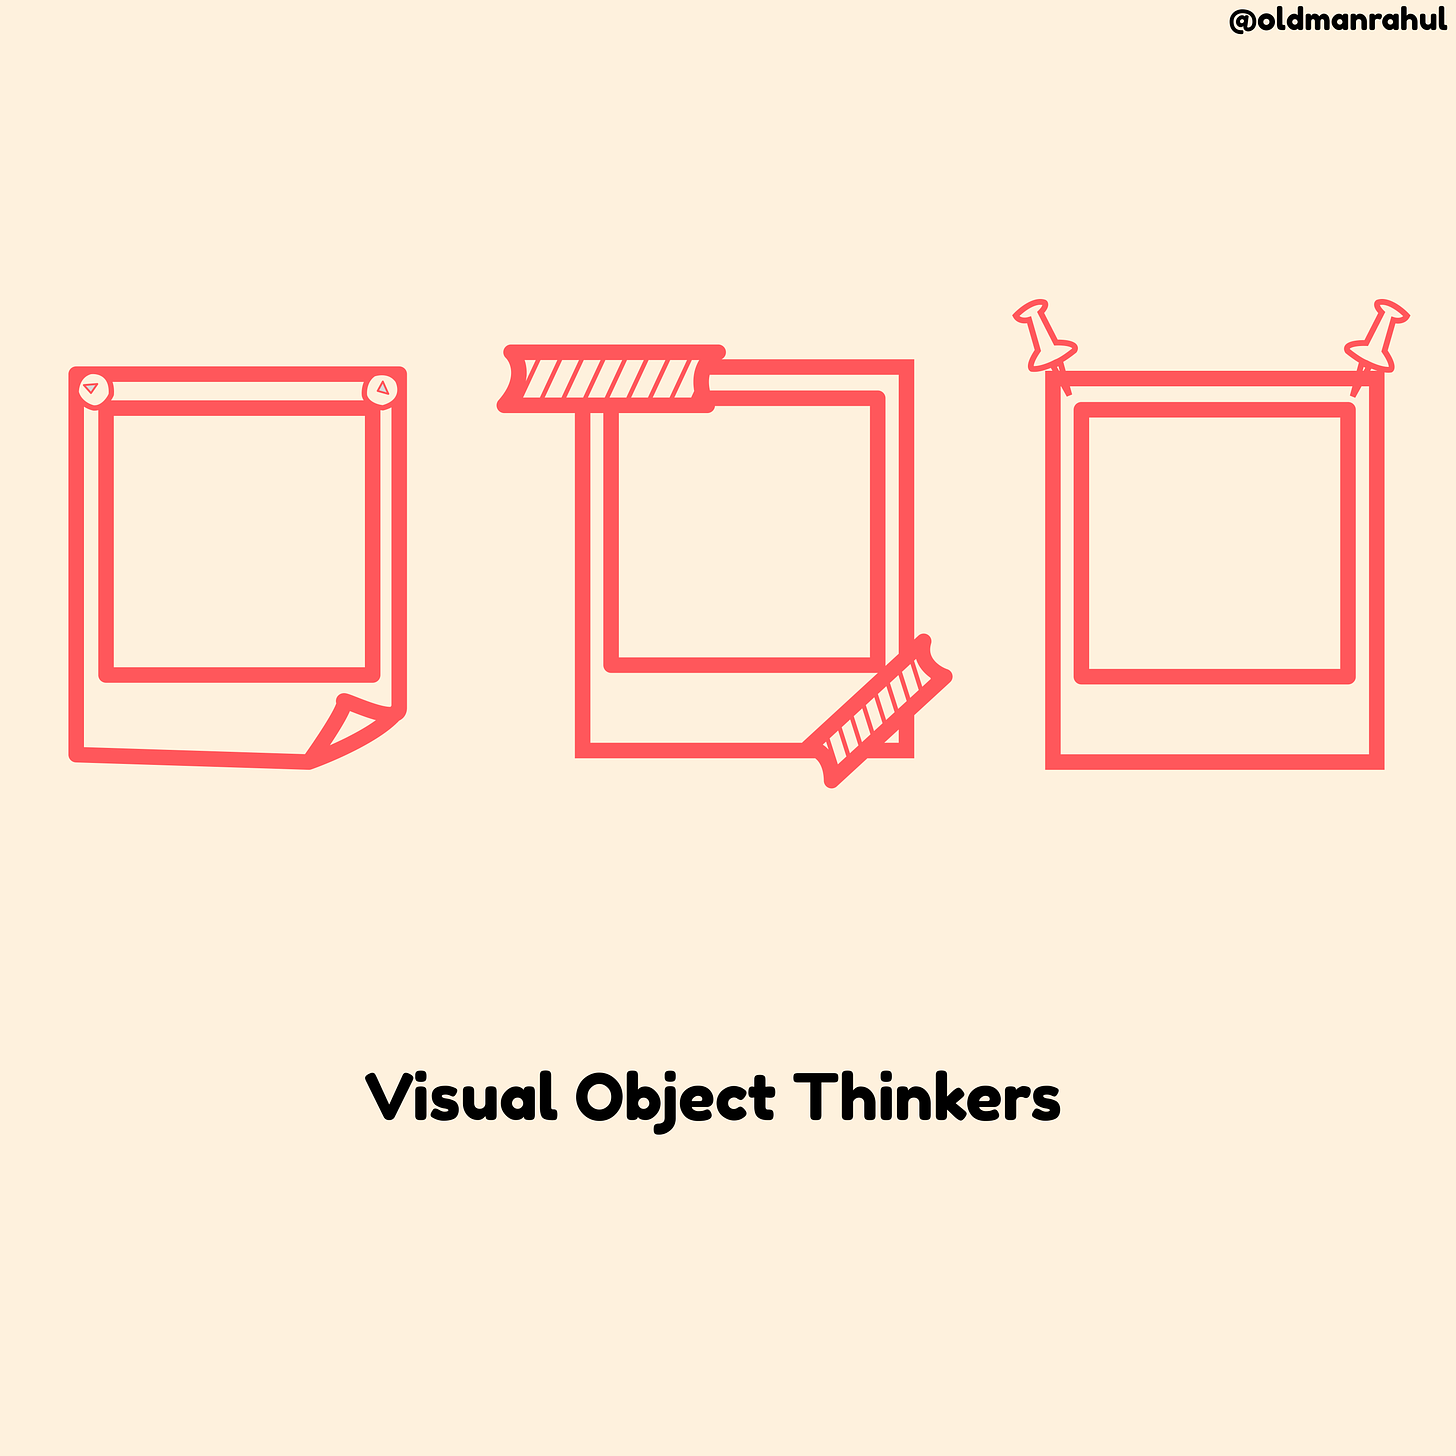 Visual Object Thinkers